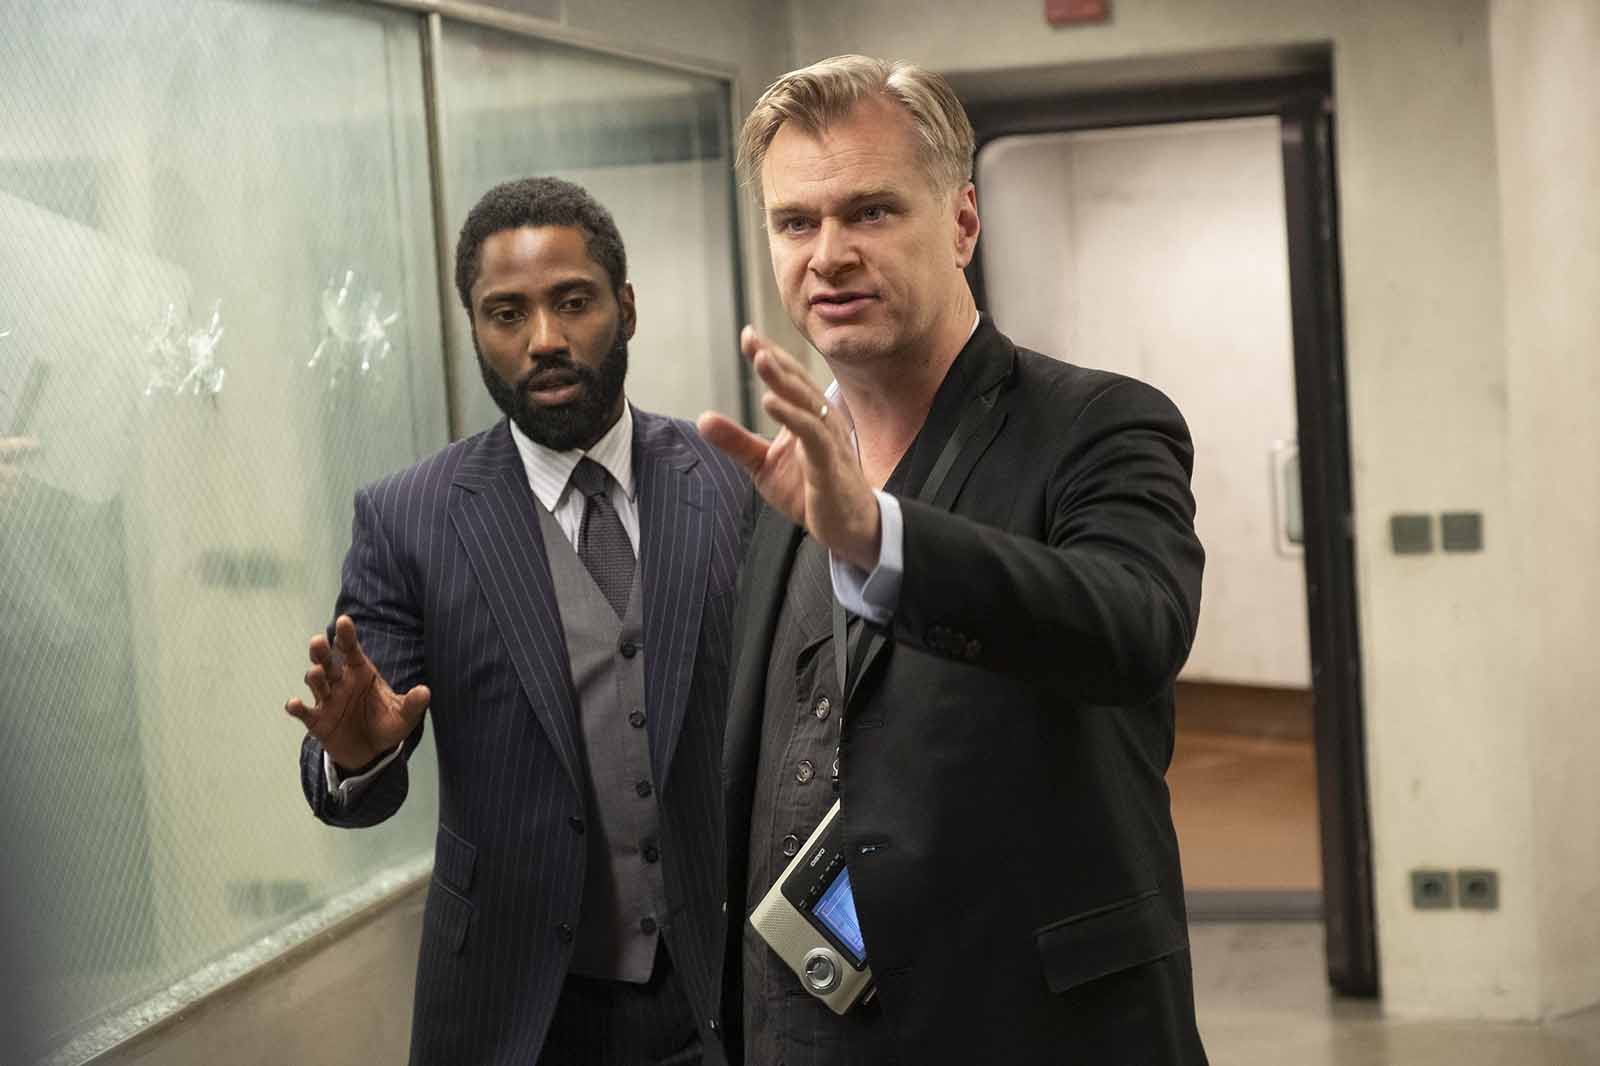 'Tenet' is supposed to be the savior of cinema, but considering Christopher Nolan can't write a movie to save his life, that's not a good sign. 